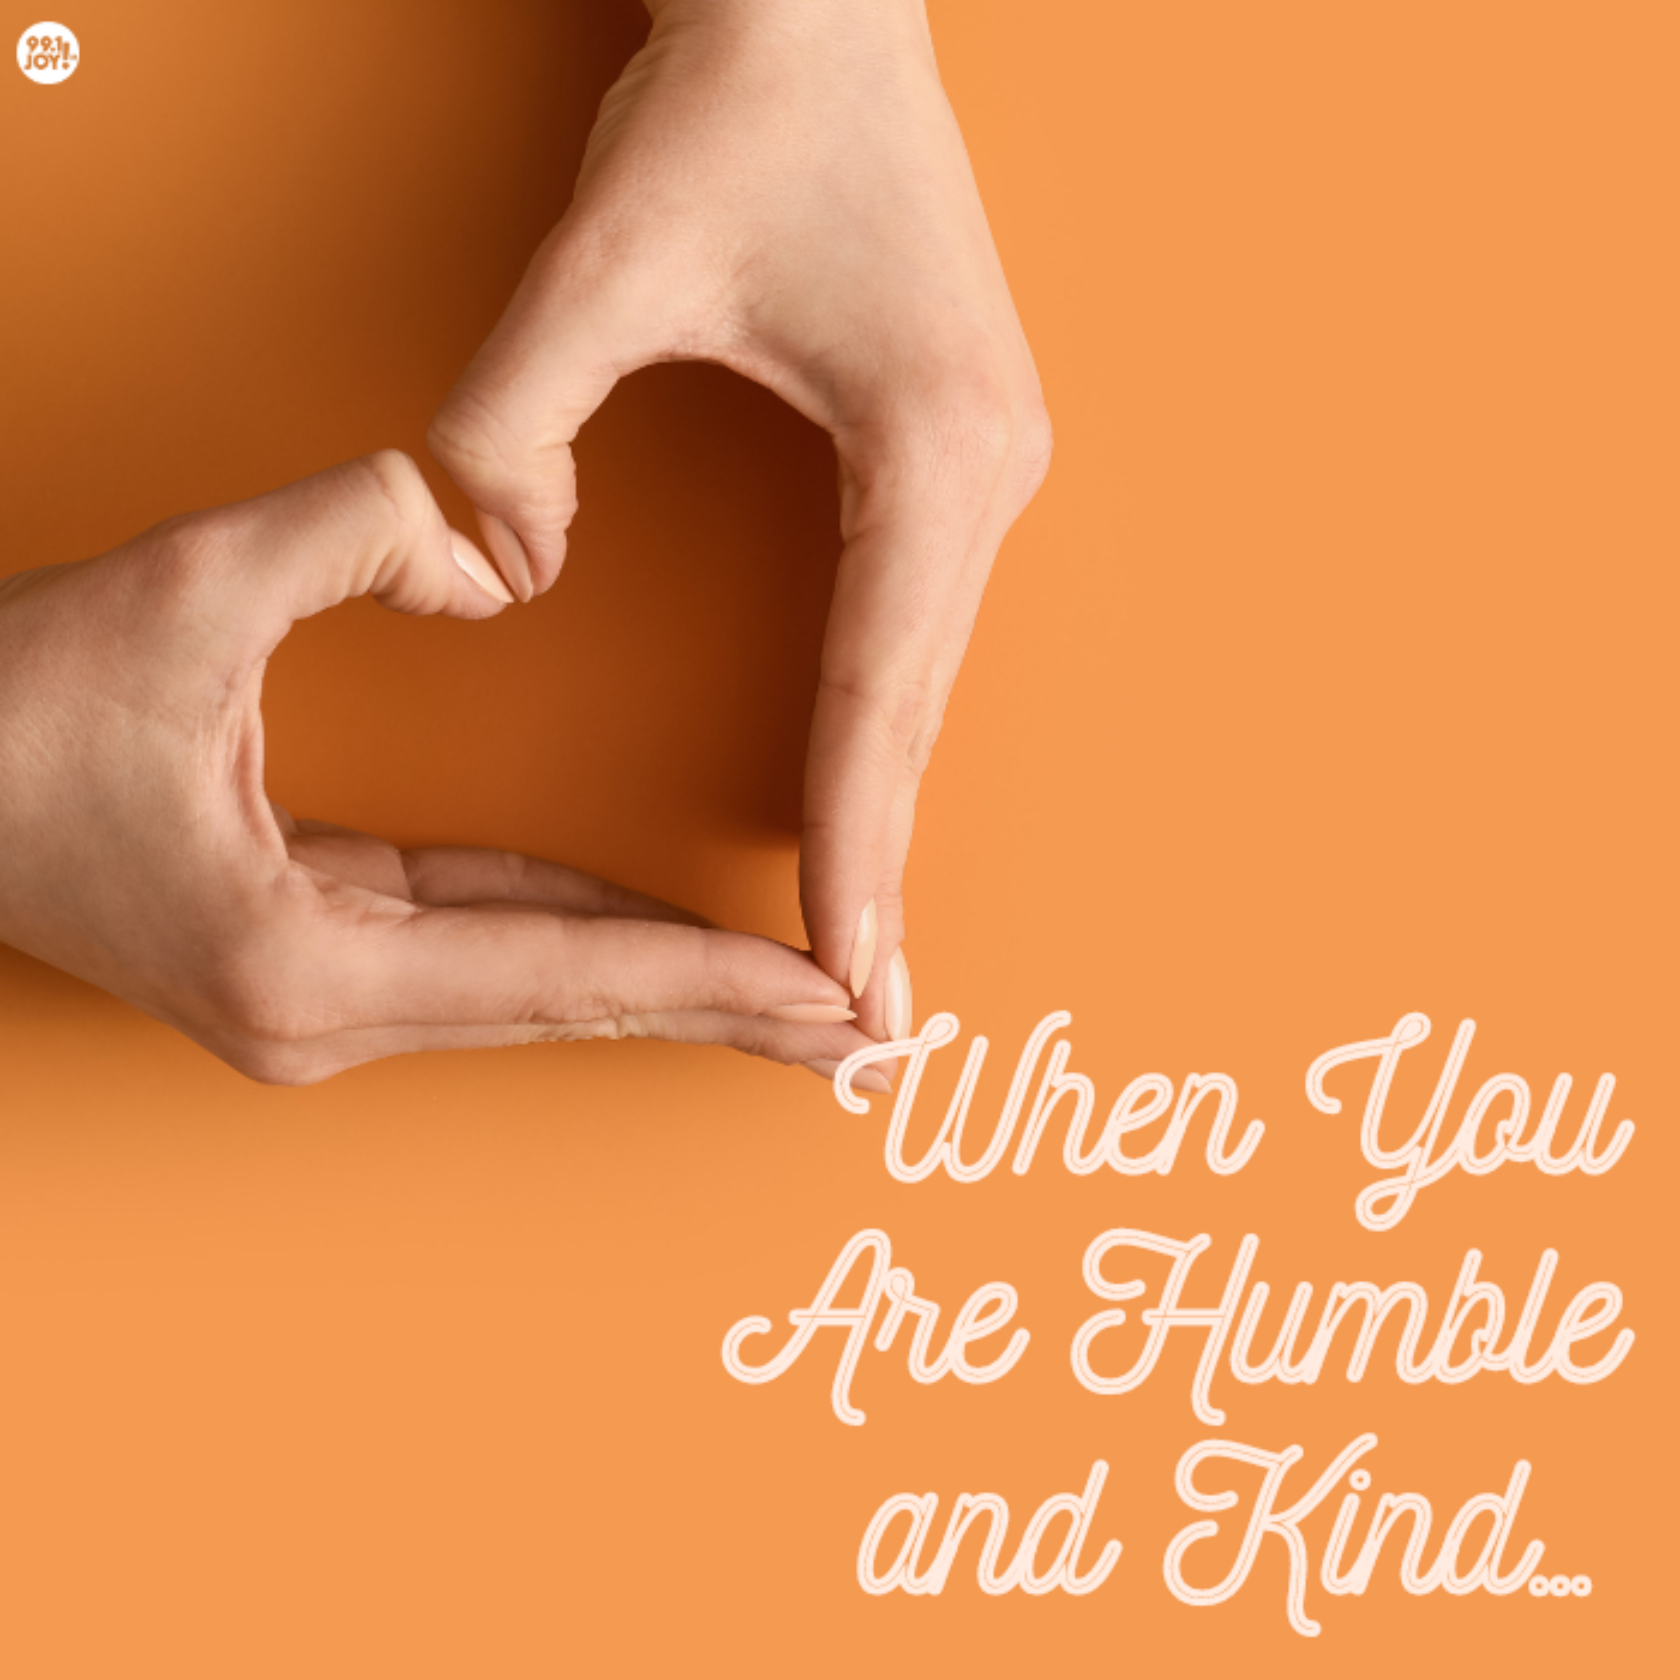 When You Are Humble and Kind…